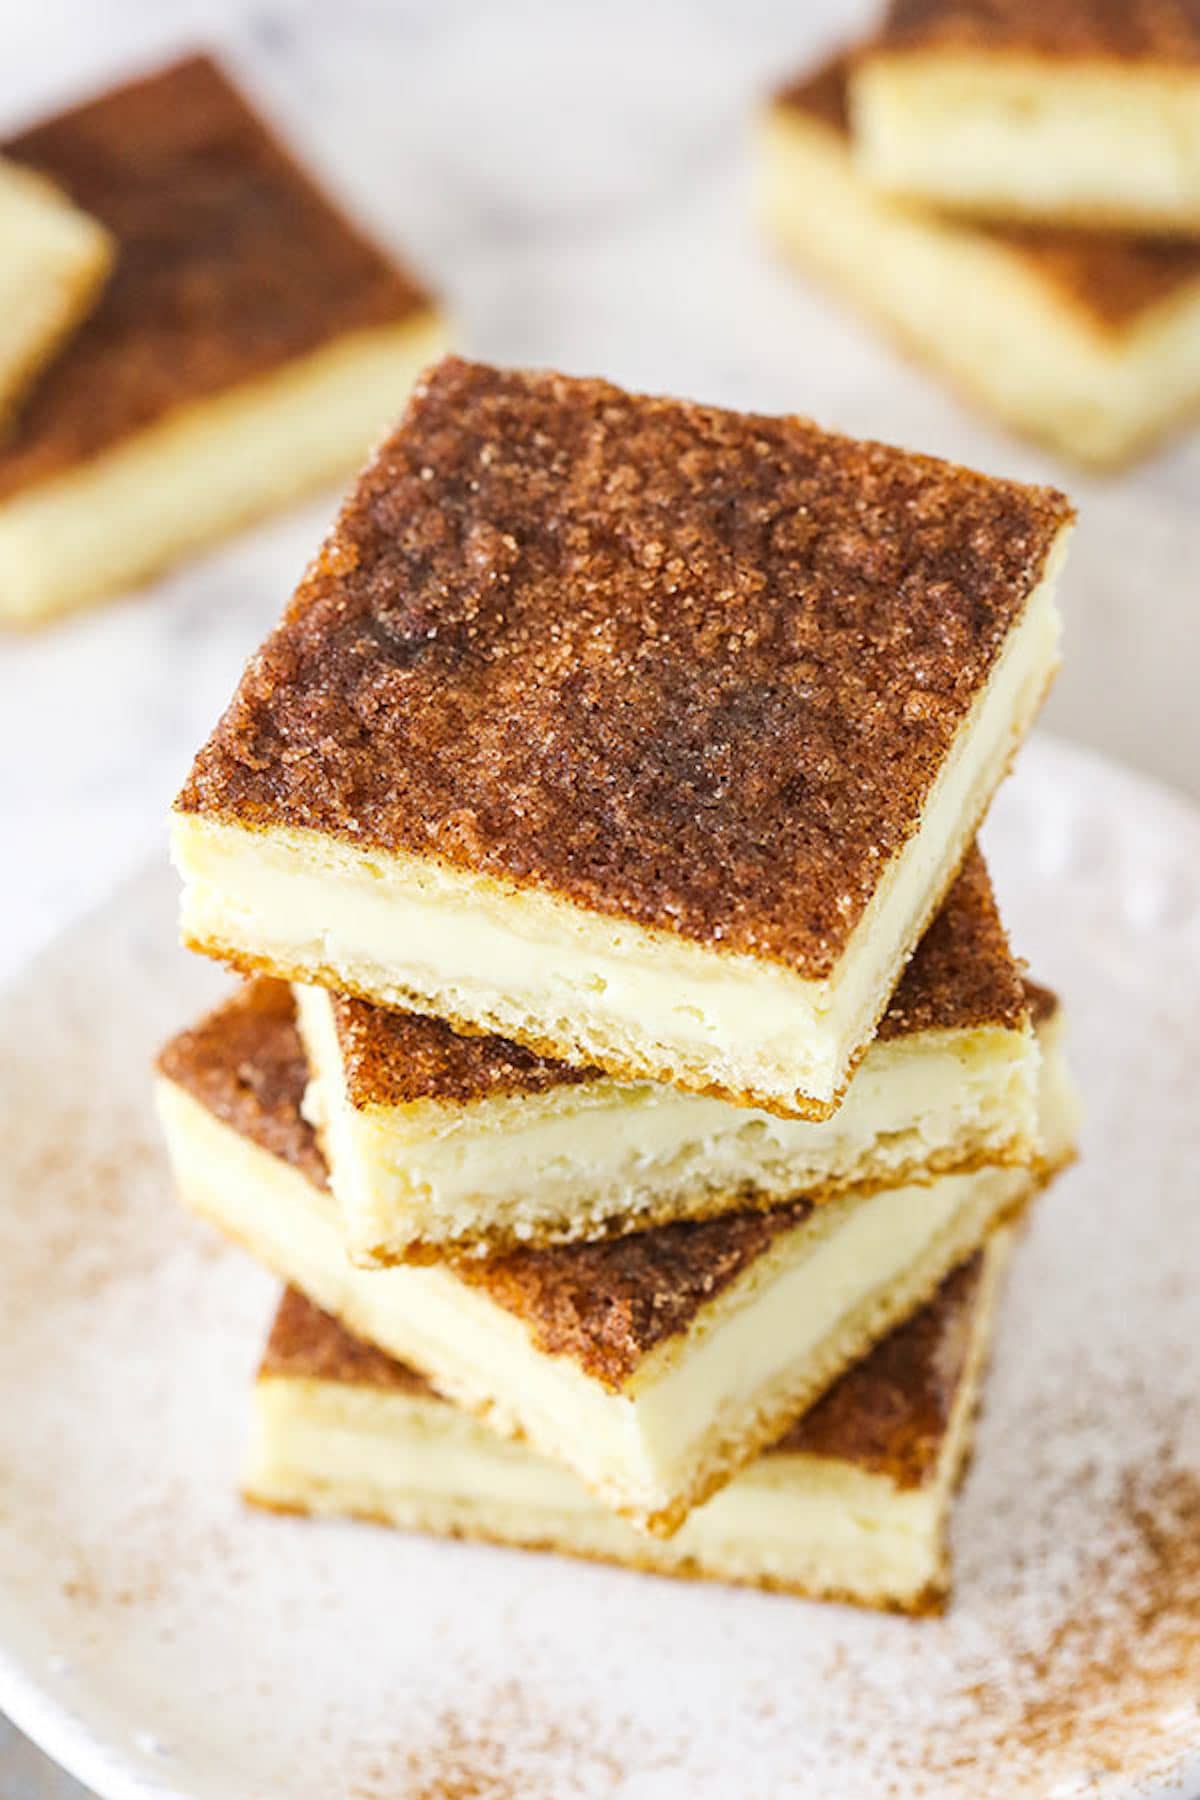 Four Cinnamon Sugar Cheesecake Bars Stacked on a White Plate